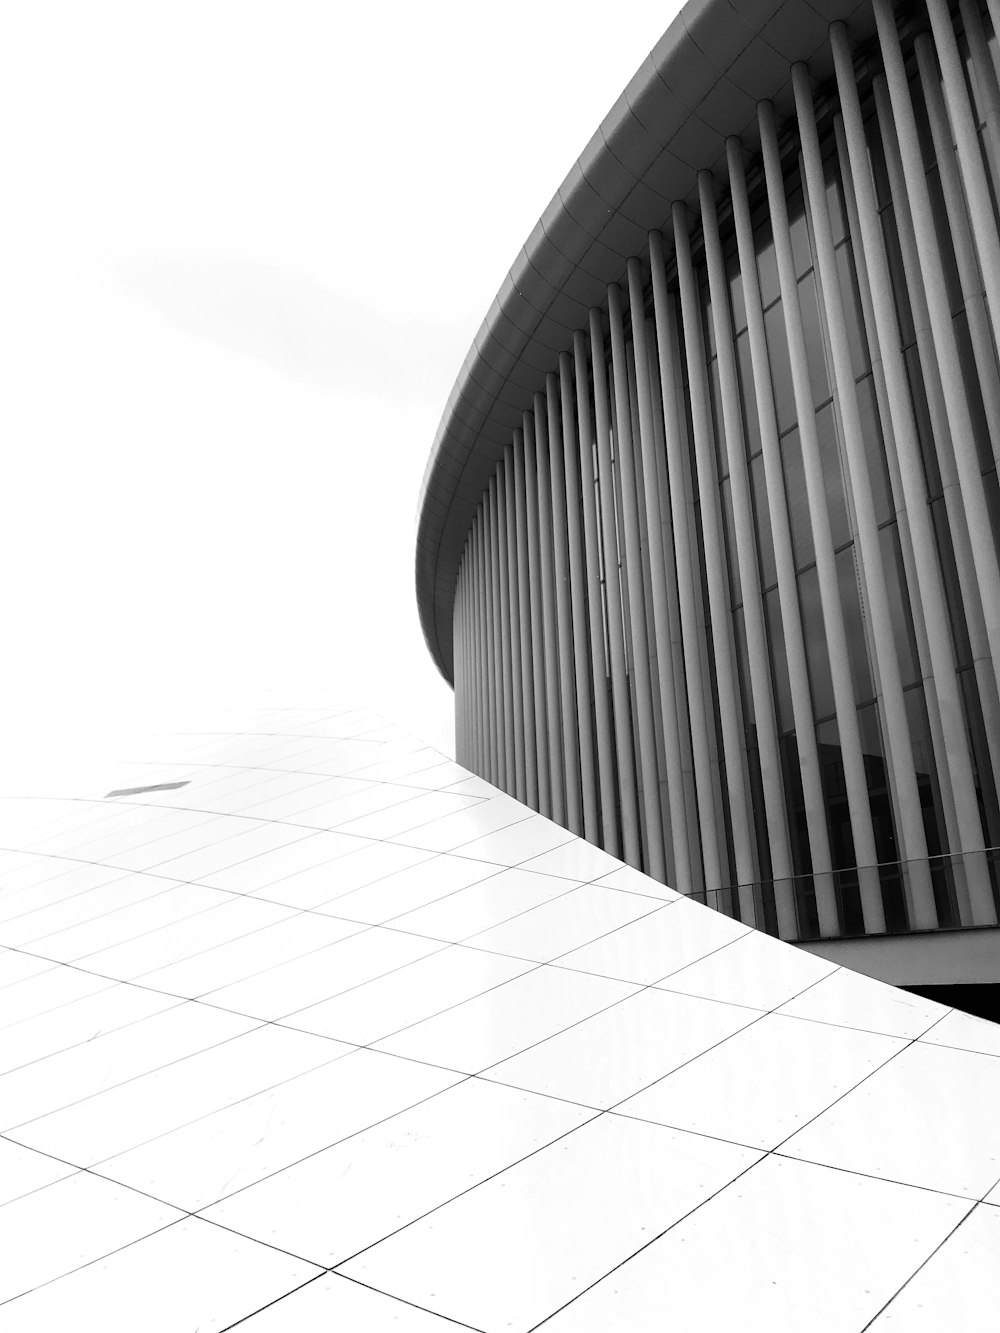 a black and white photo of a curved building